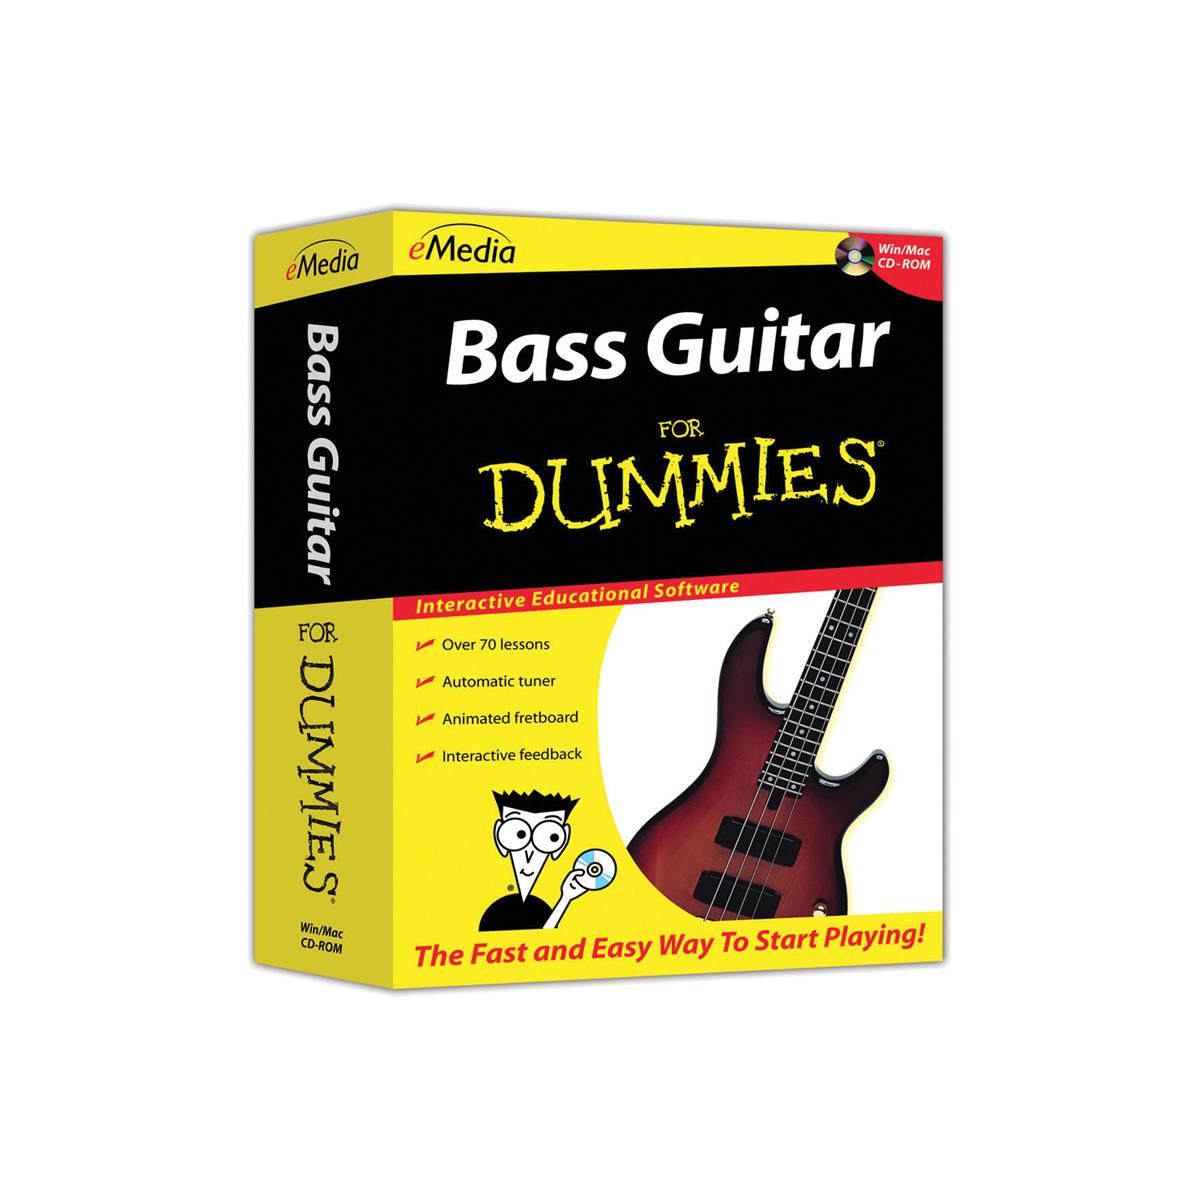 eMedia Bass Guitar For Dummies Software for Windows, Electronic Download -  FD07101DLW